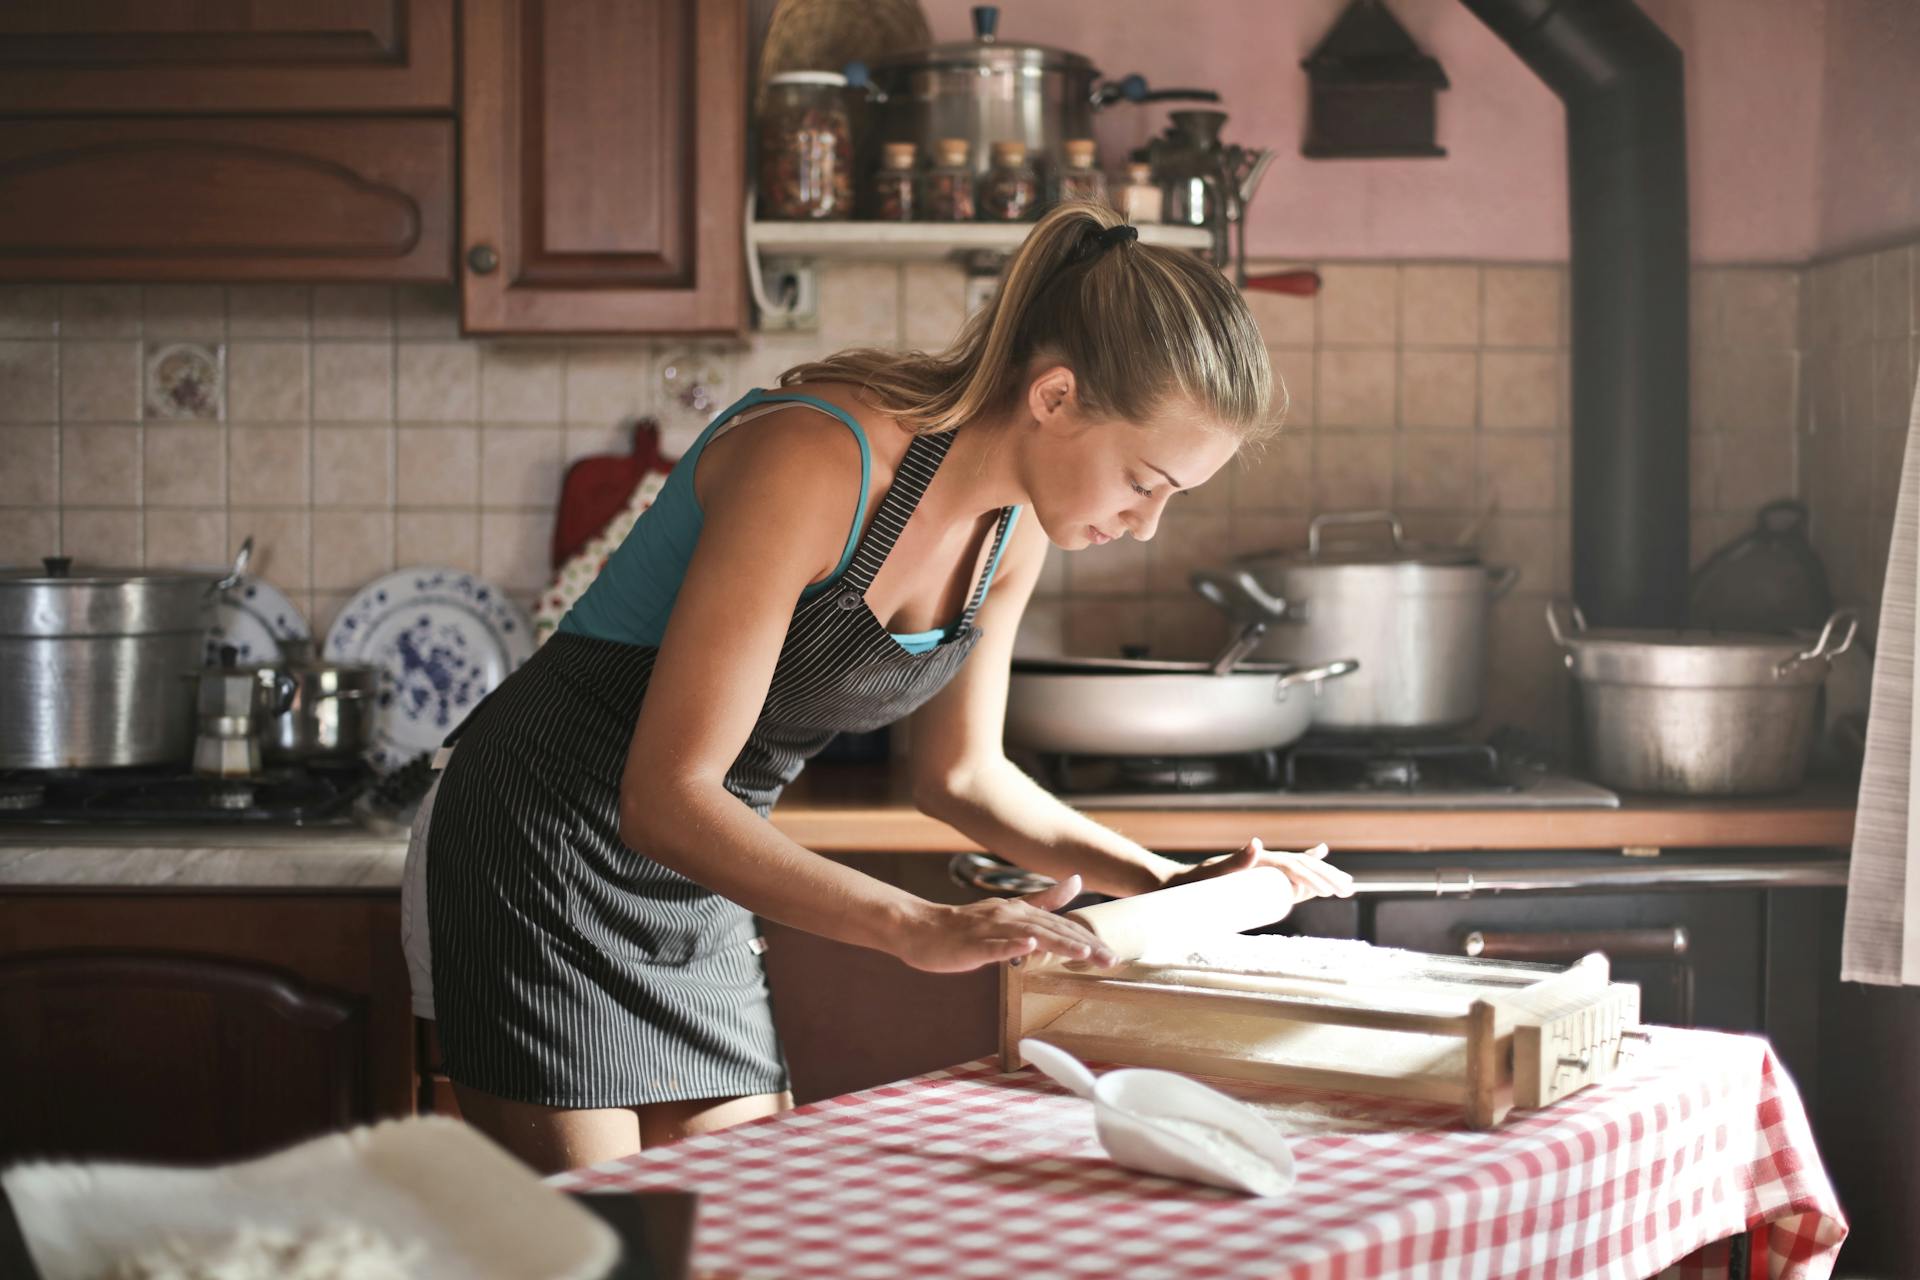 A young woman rolling dough for baking in kitchen | Source: Pexels